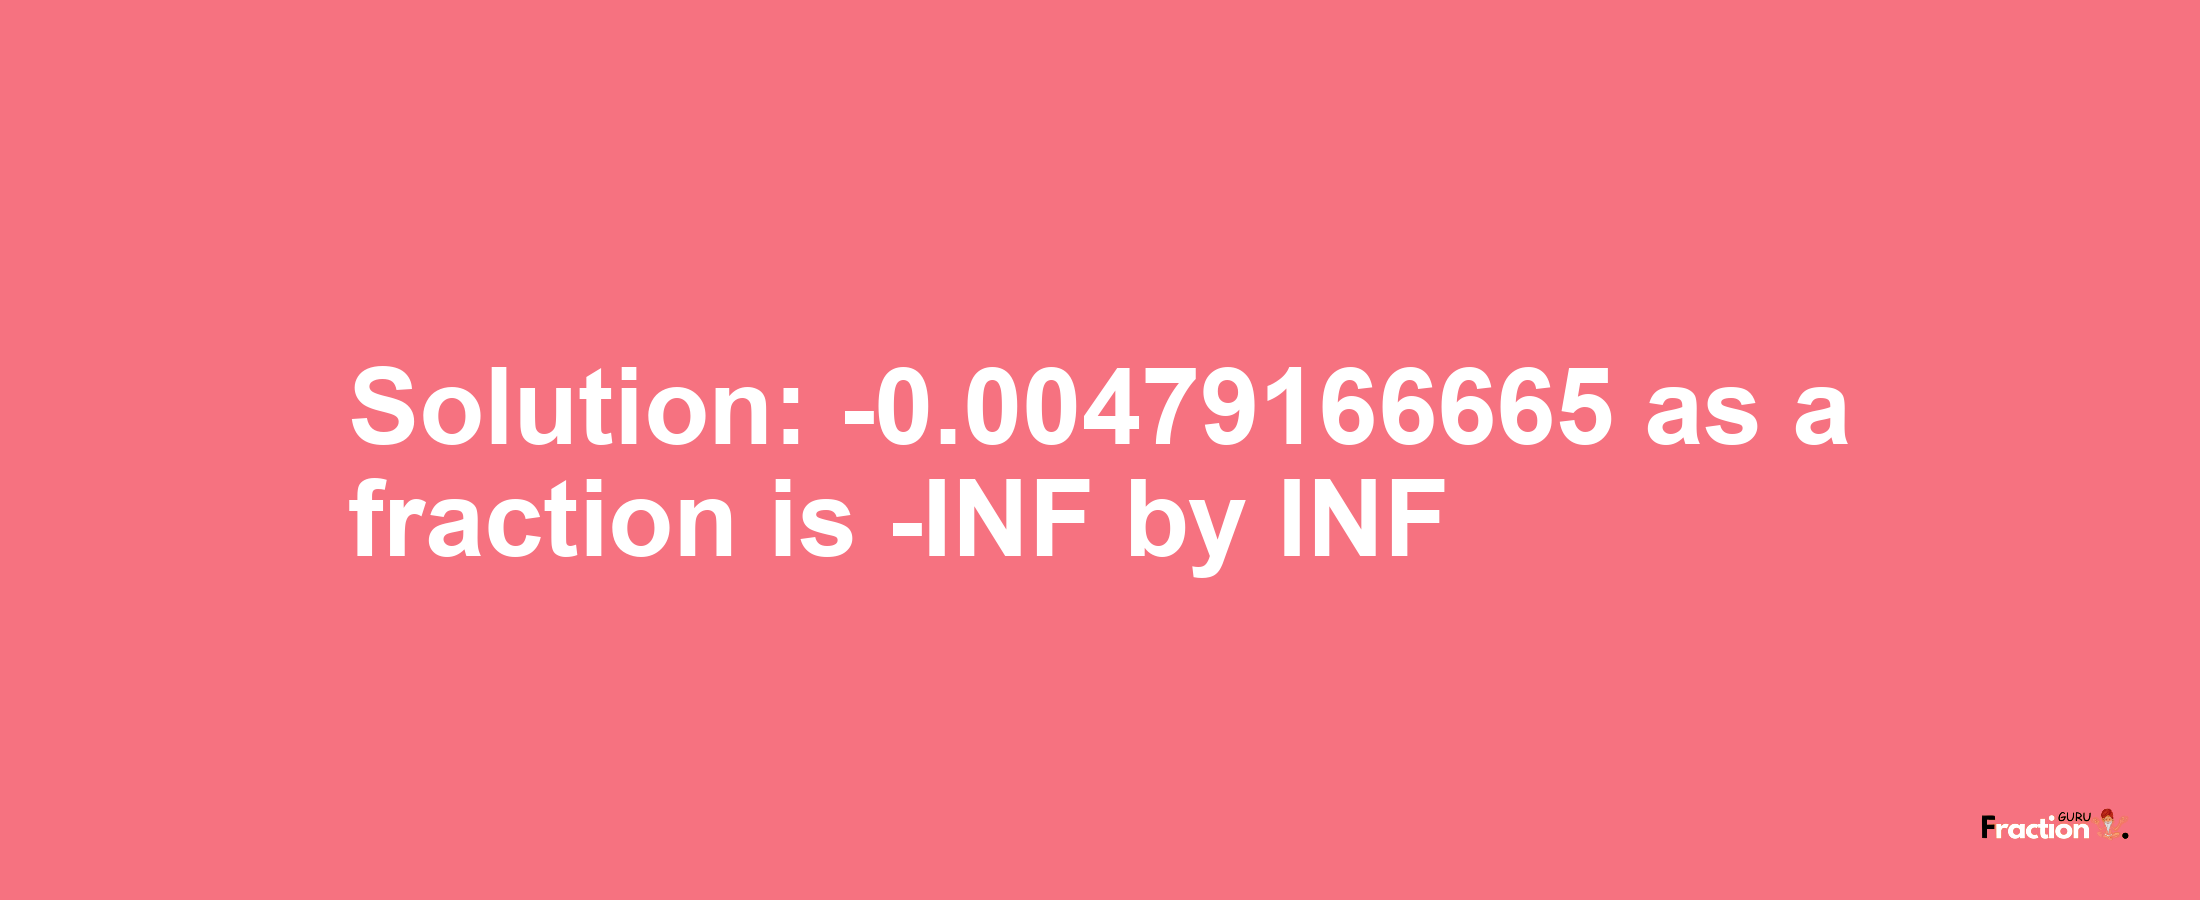 Solution:-0.00479166665 as a fraction is -INF/INF